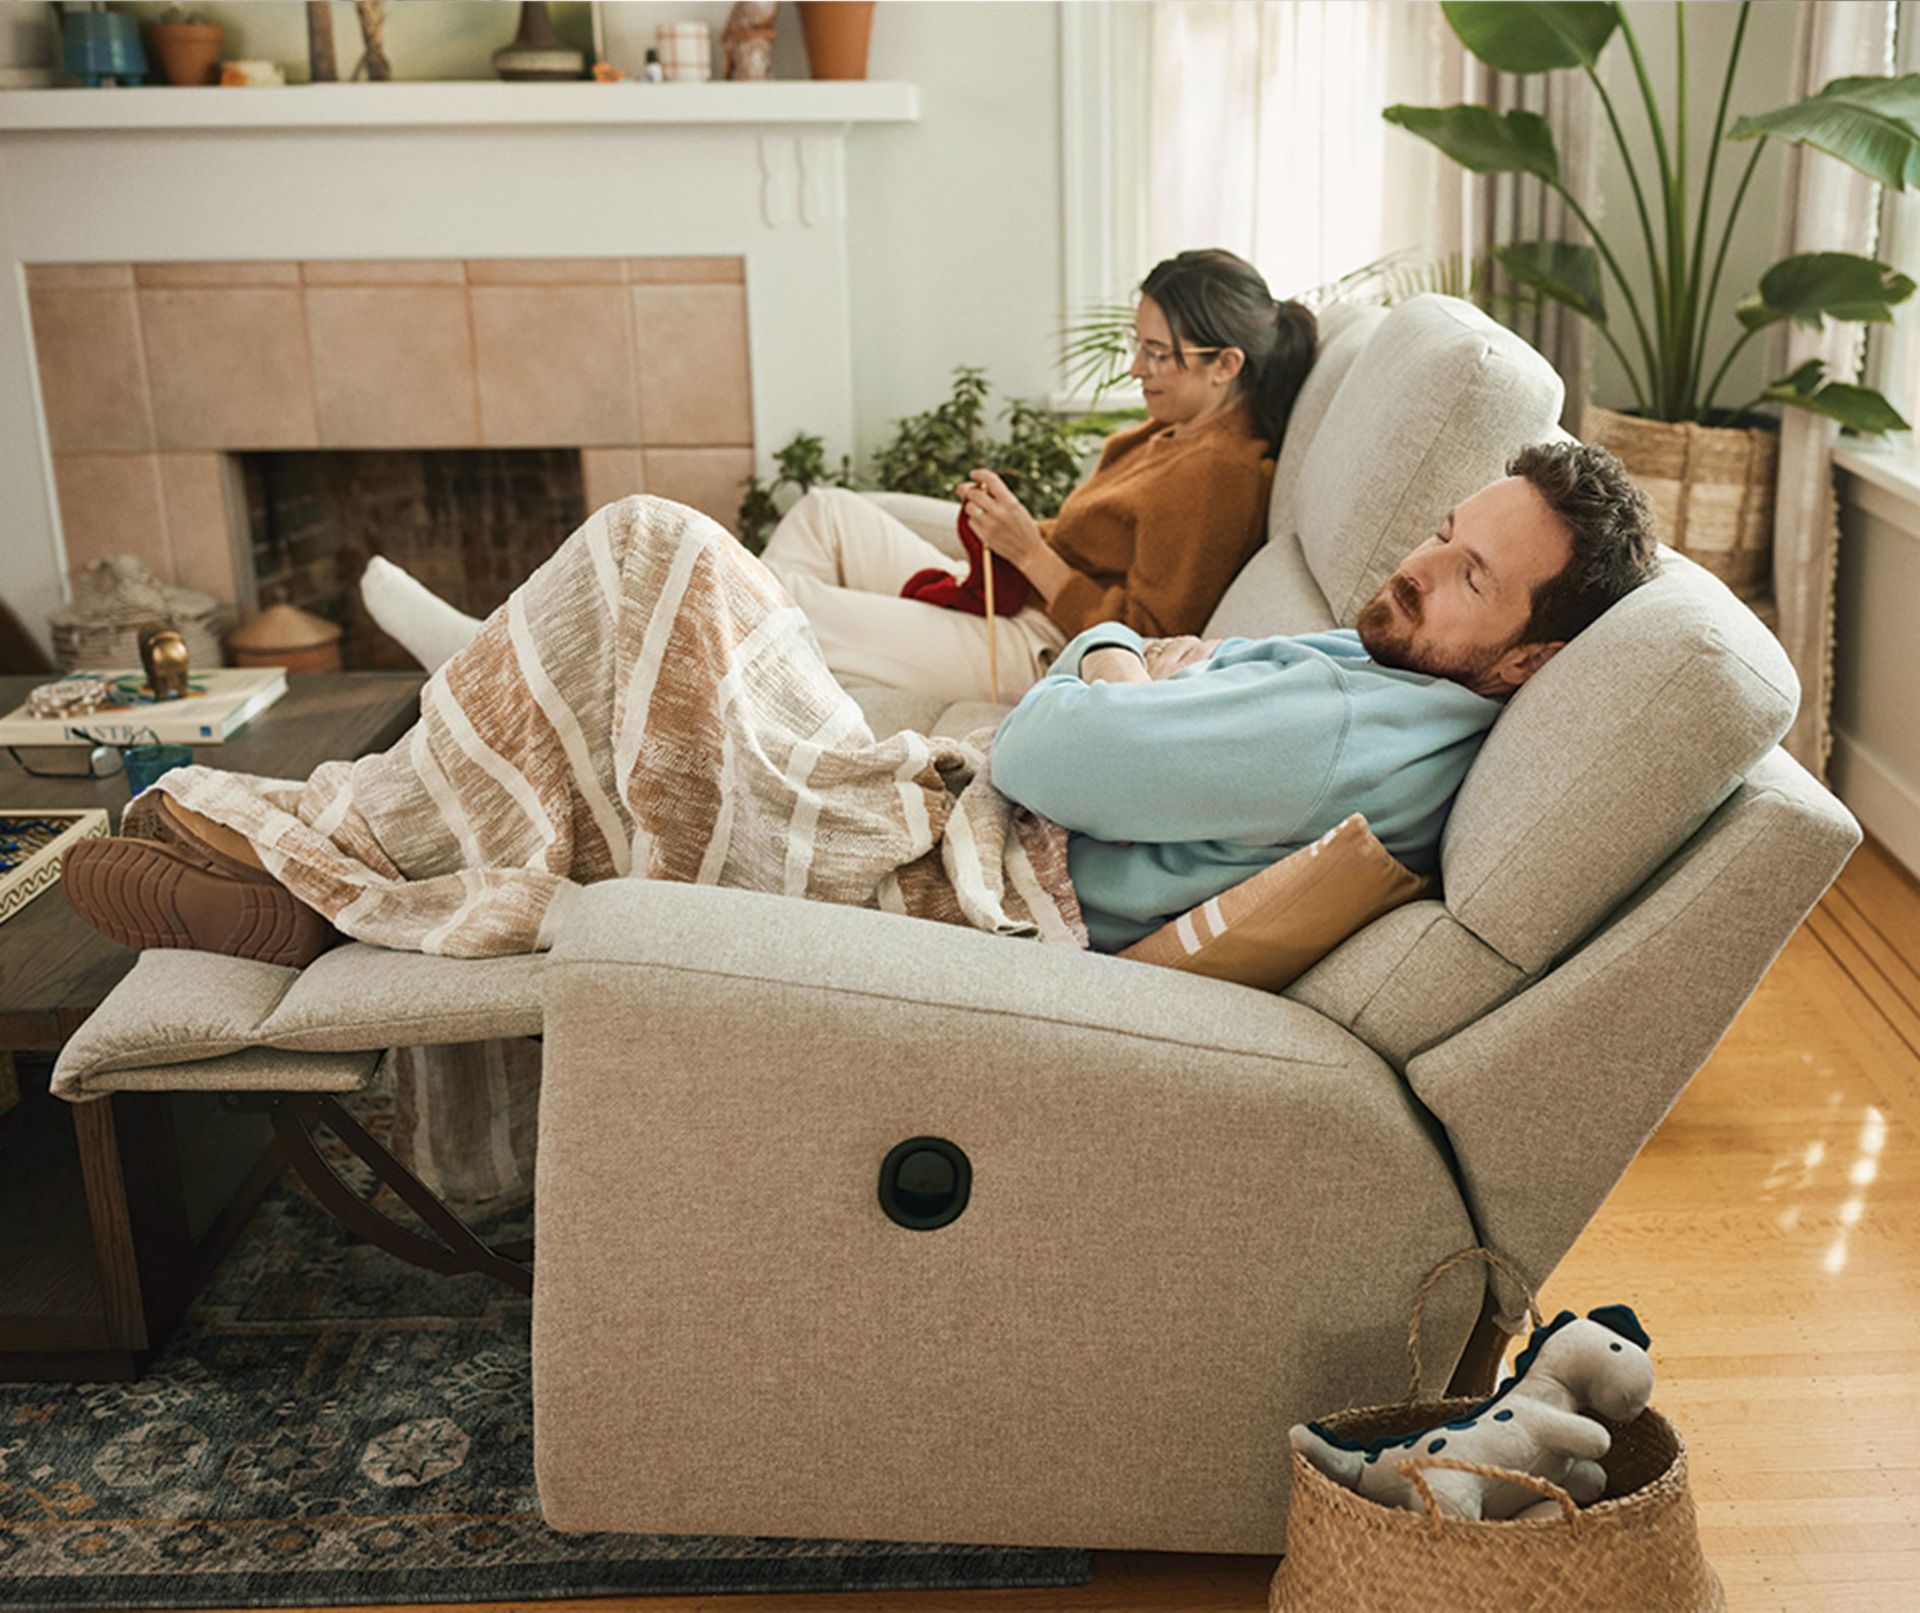 Apollo Reclining Chairs with couple sleeping and knitting